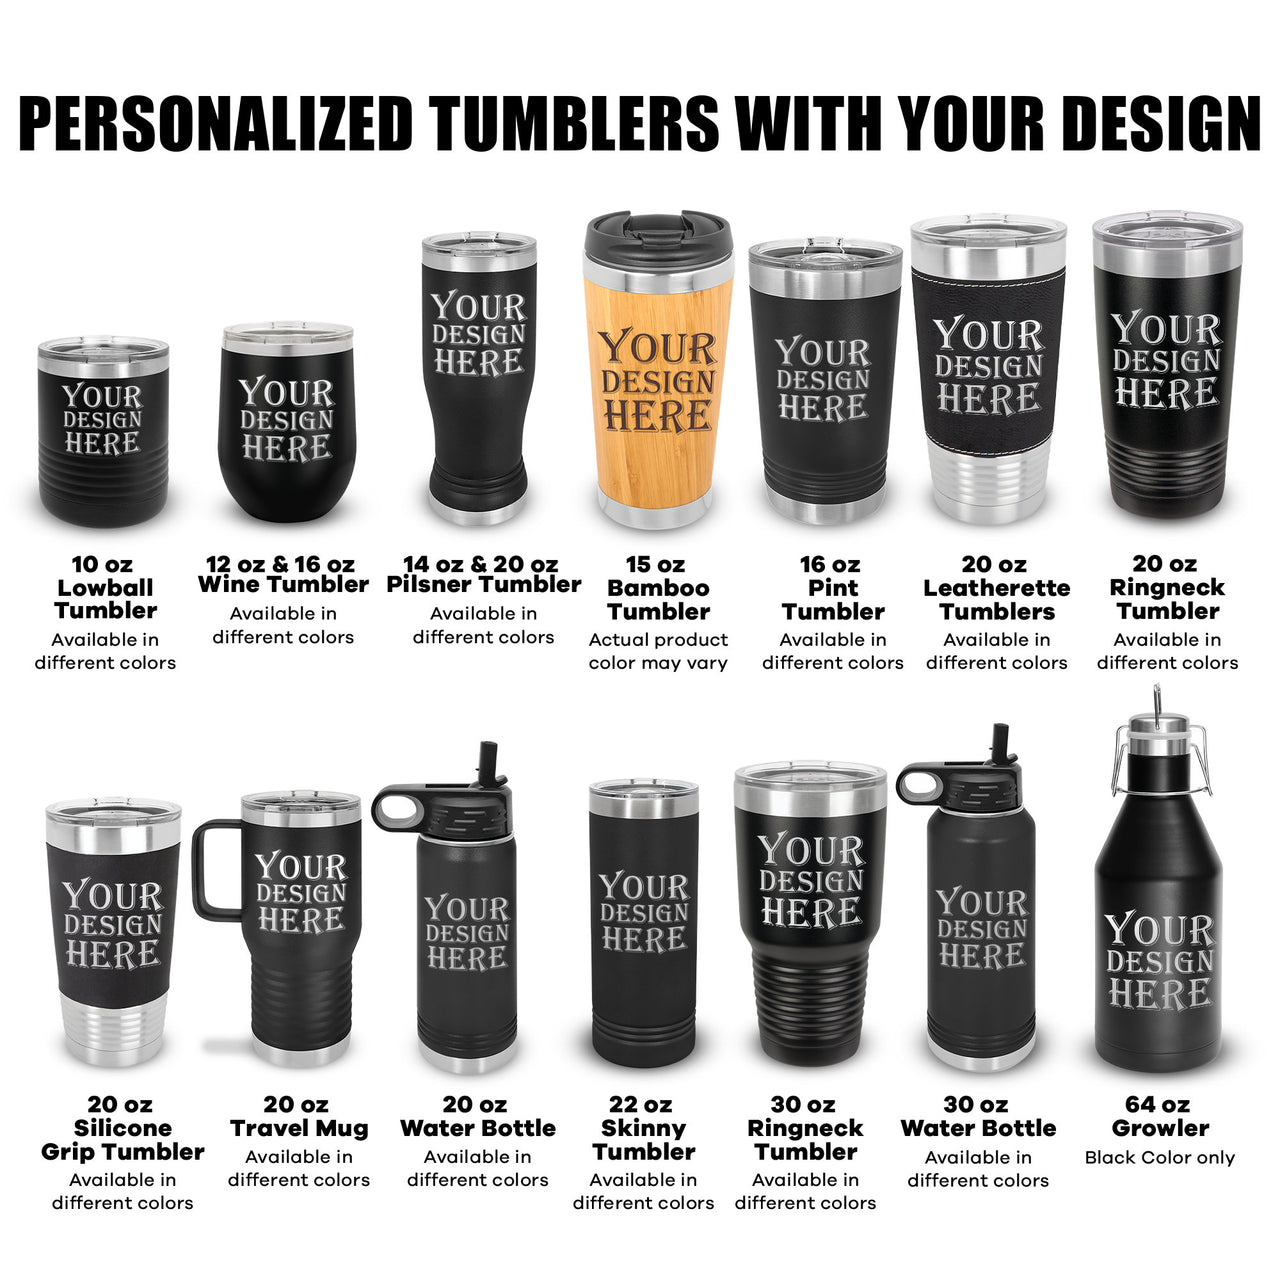 Custom Dad EST Dates, New Dad Gift Coffee Tumblers, Personalized Tumblers Dad's Life Gift, First Father's Day Gift, Travel Mug, Water Bottle